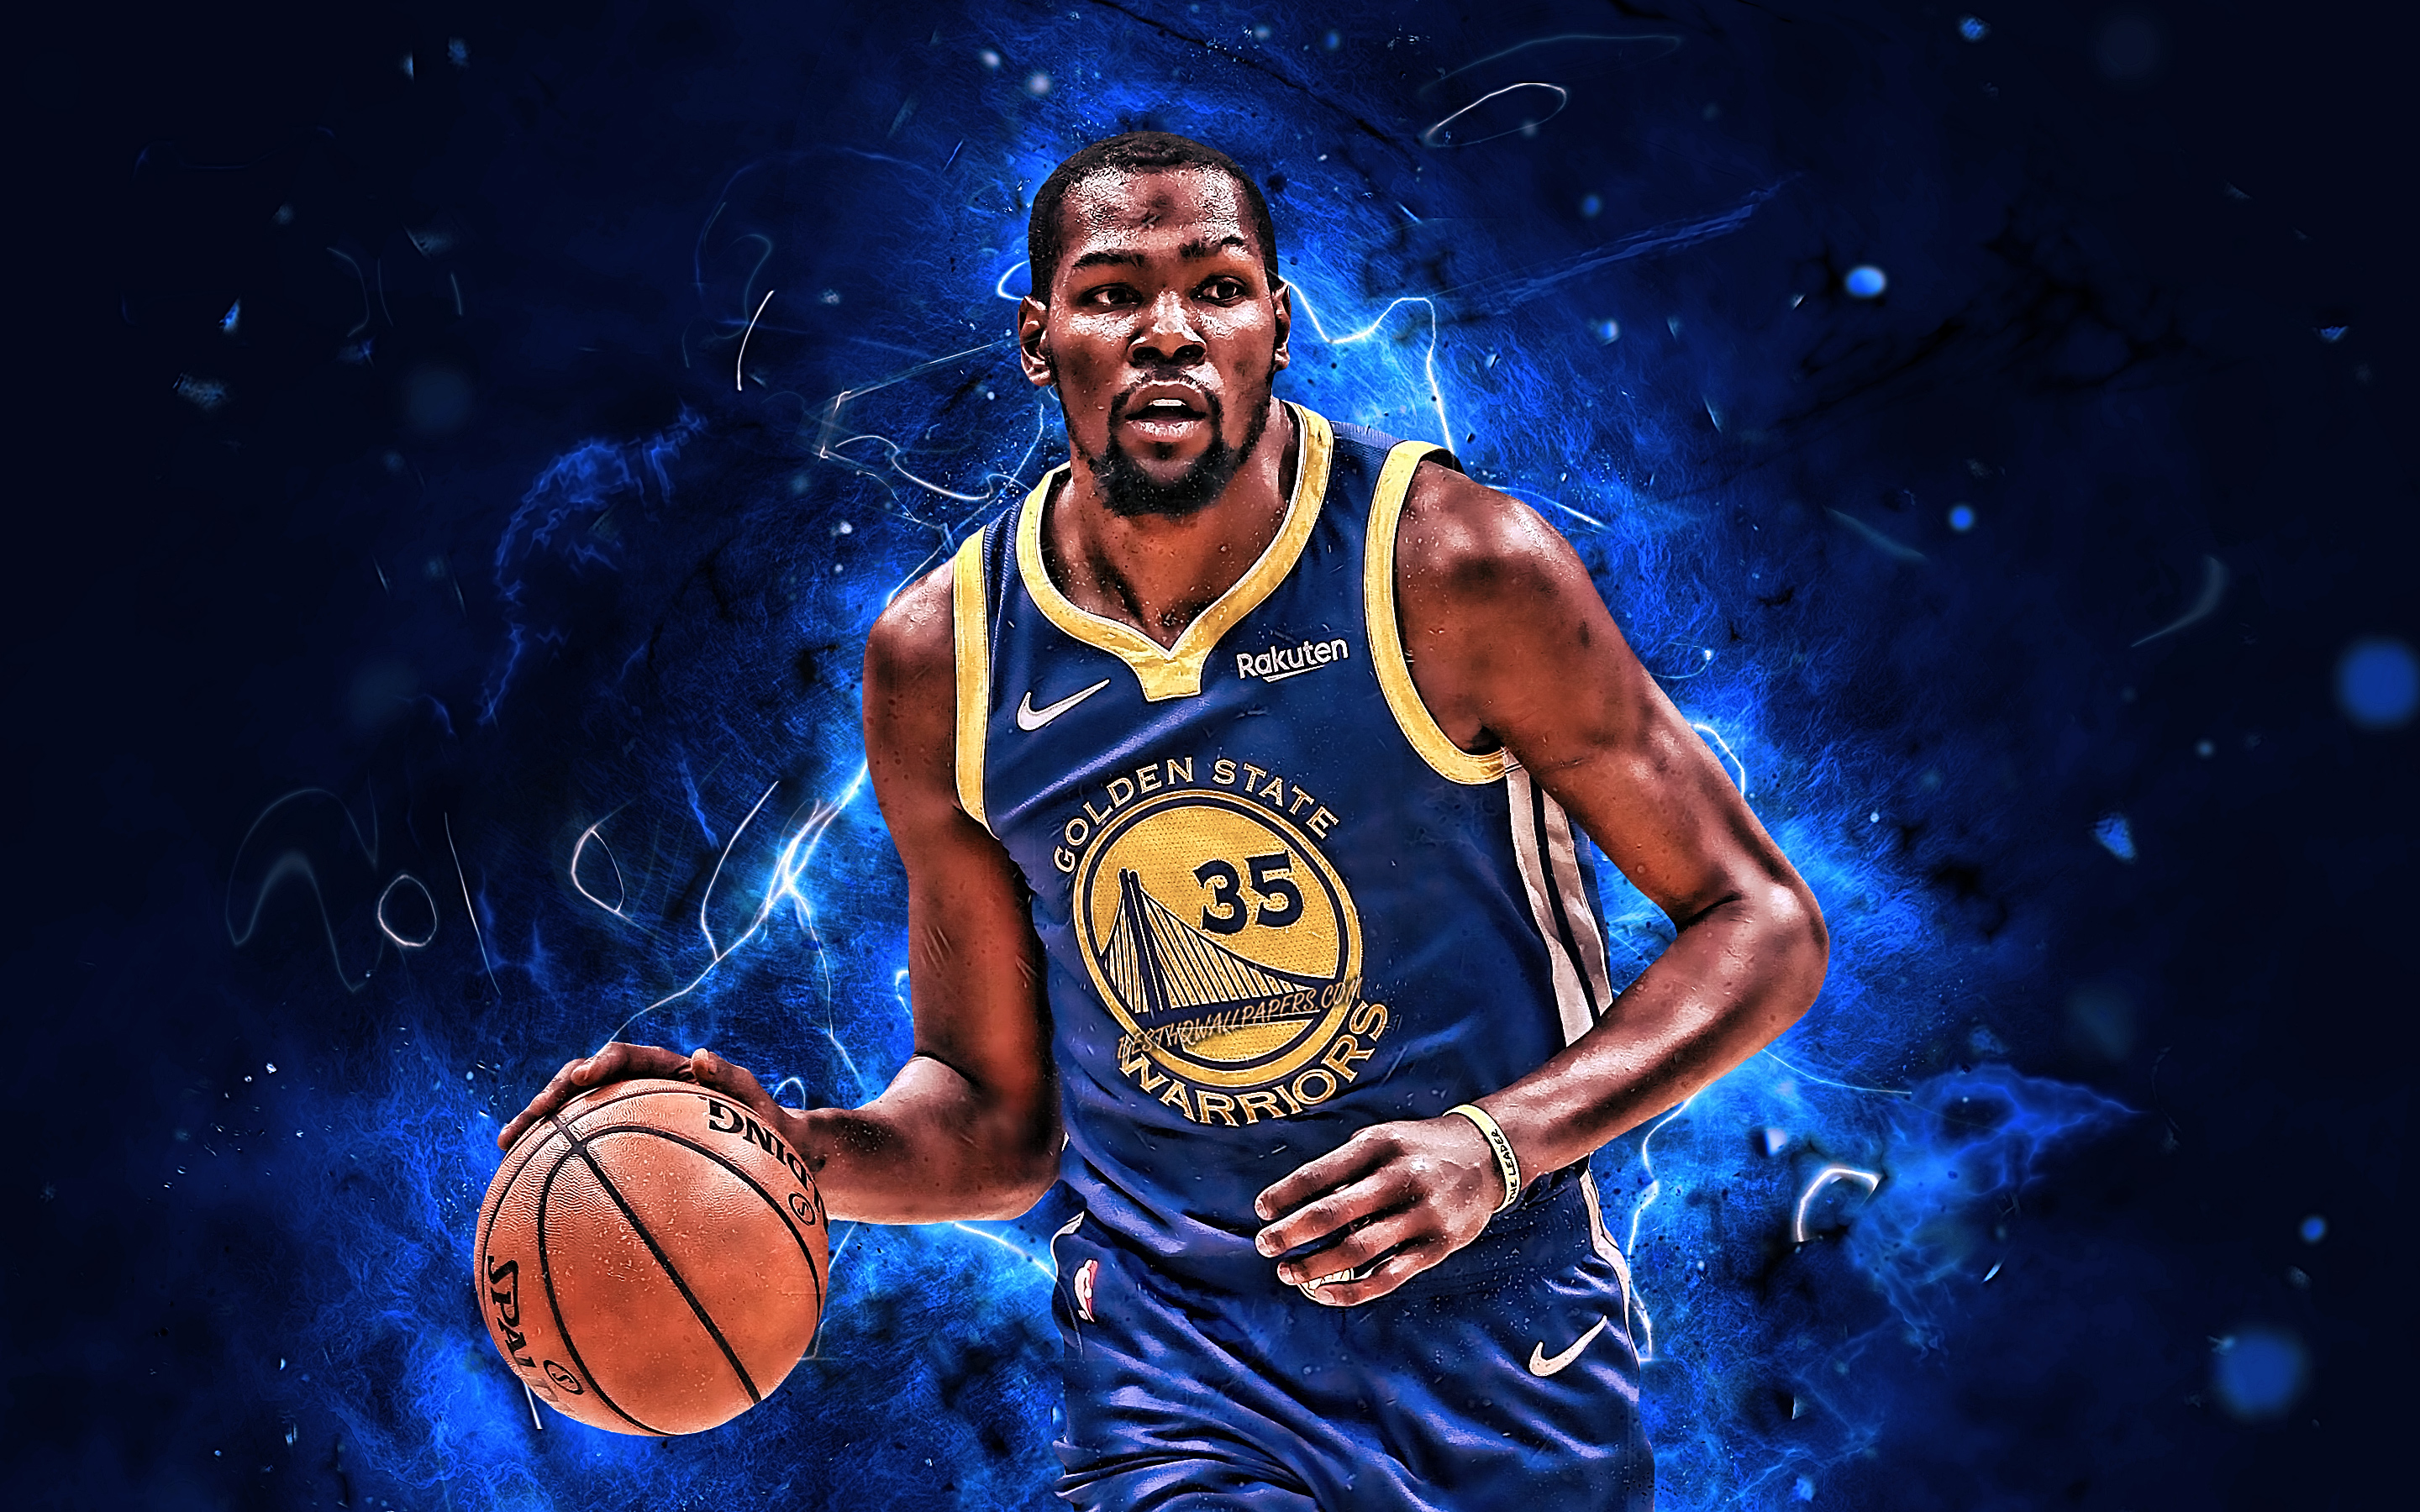 Download wallpaper Kevin Durant, basketball stars, NBA, Golden State Warriors, Kevin Wayne Durant, basketball, neon lights, creative for desktop with resolution 2880x1800. High Quality HD picture wallpaper